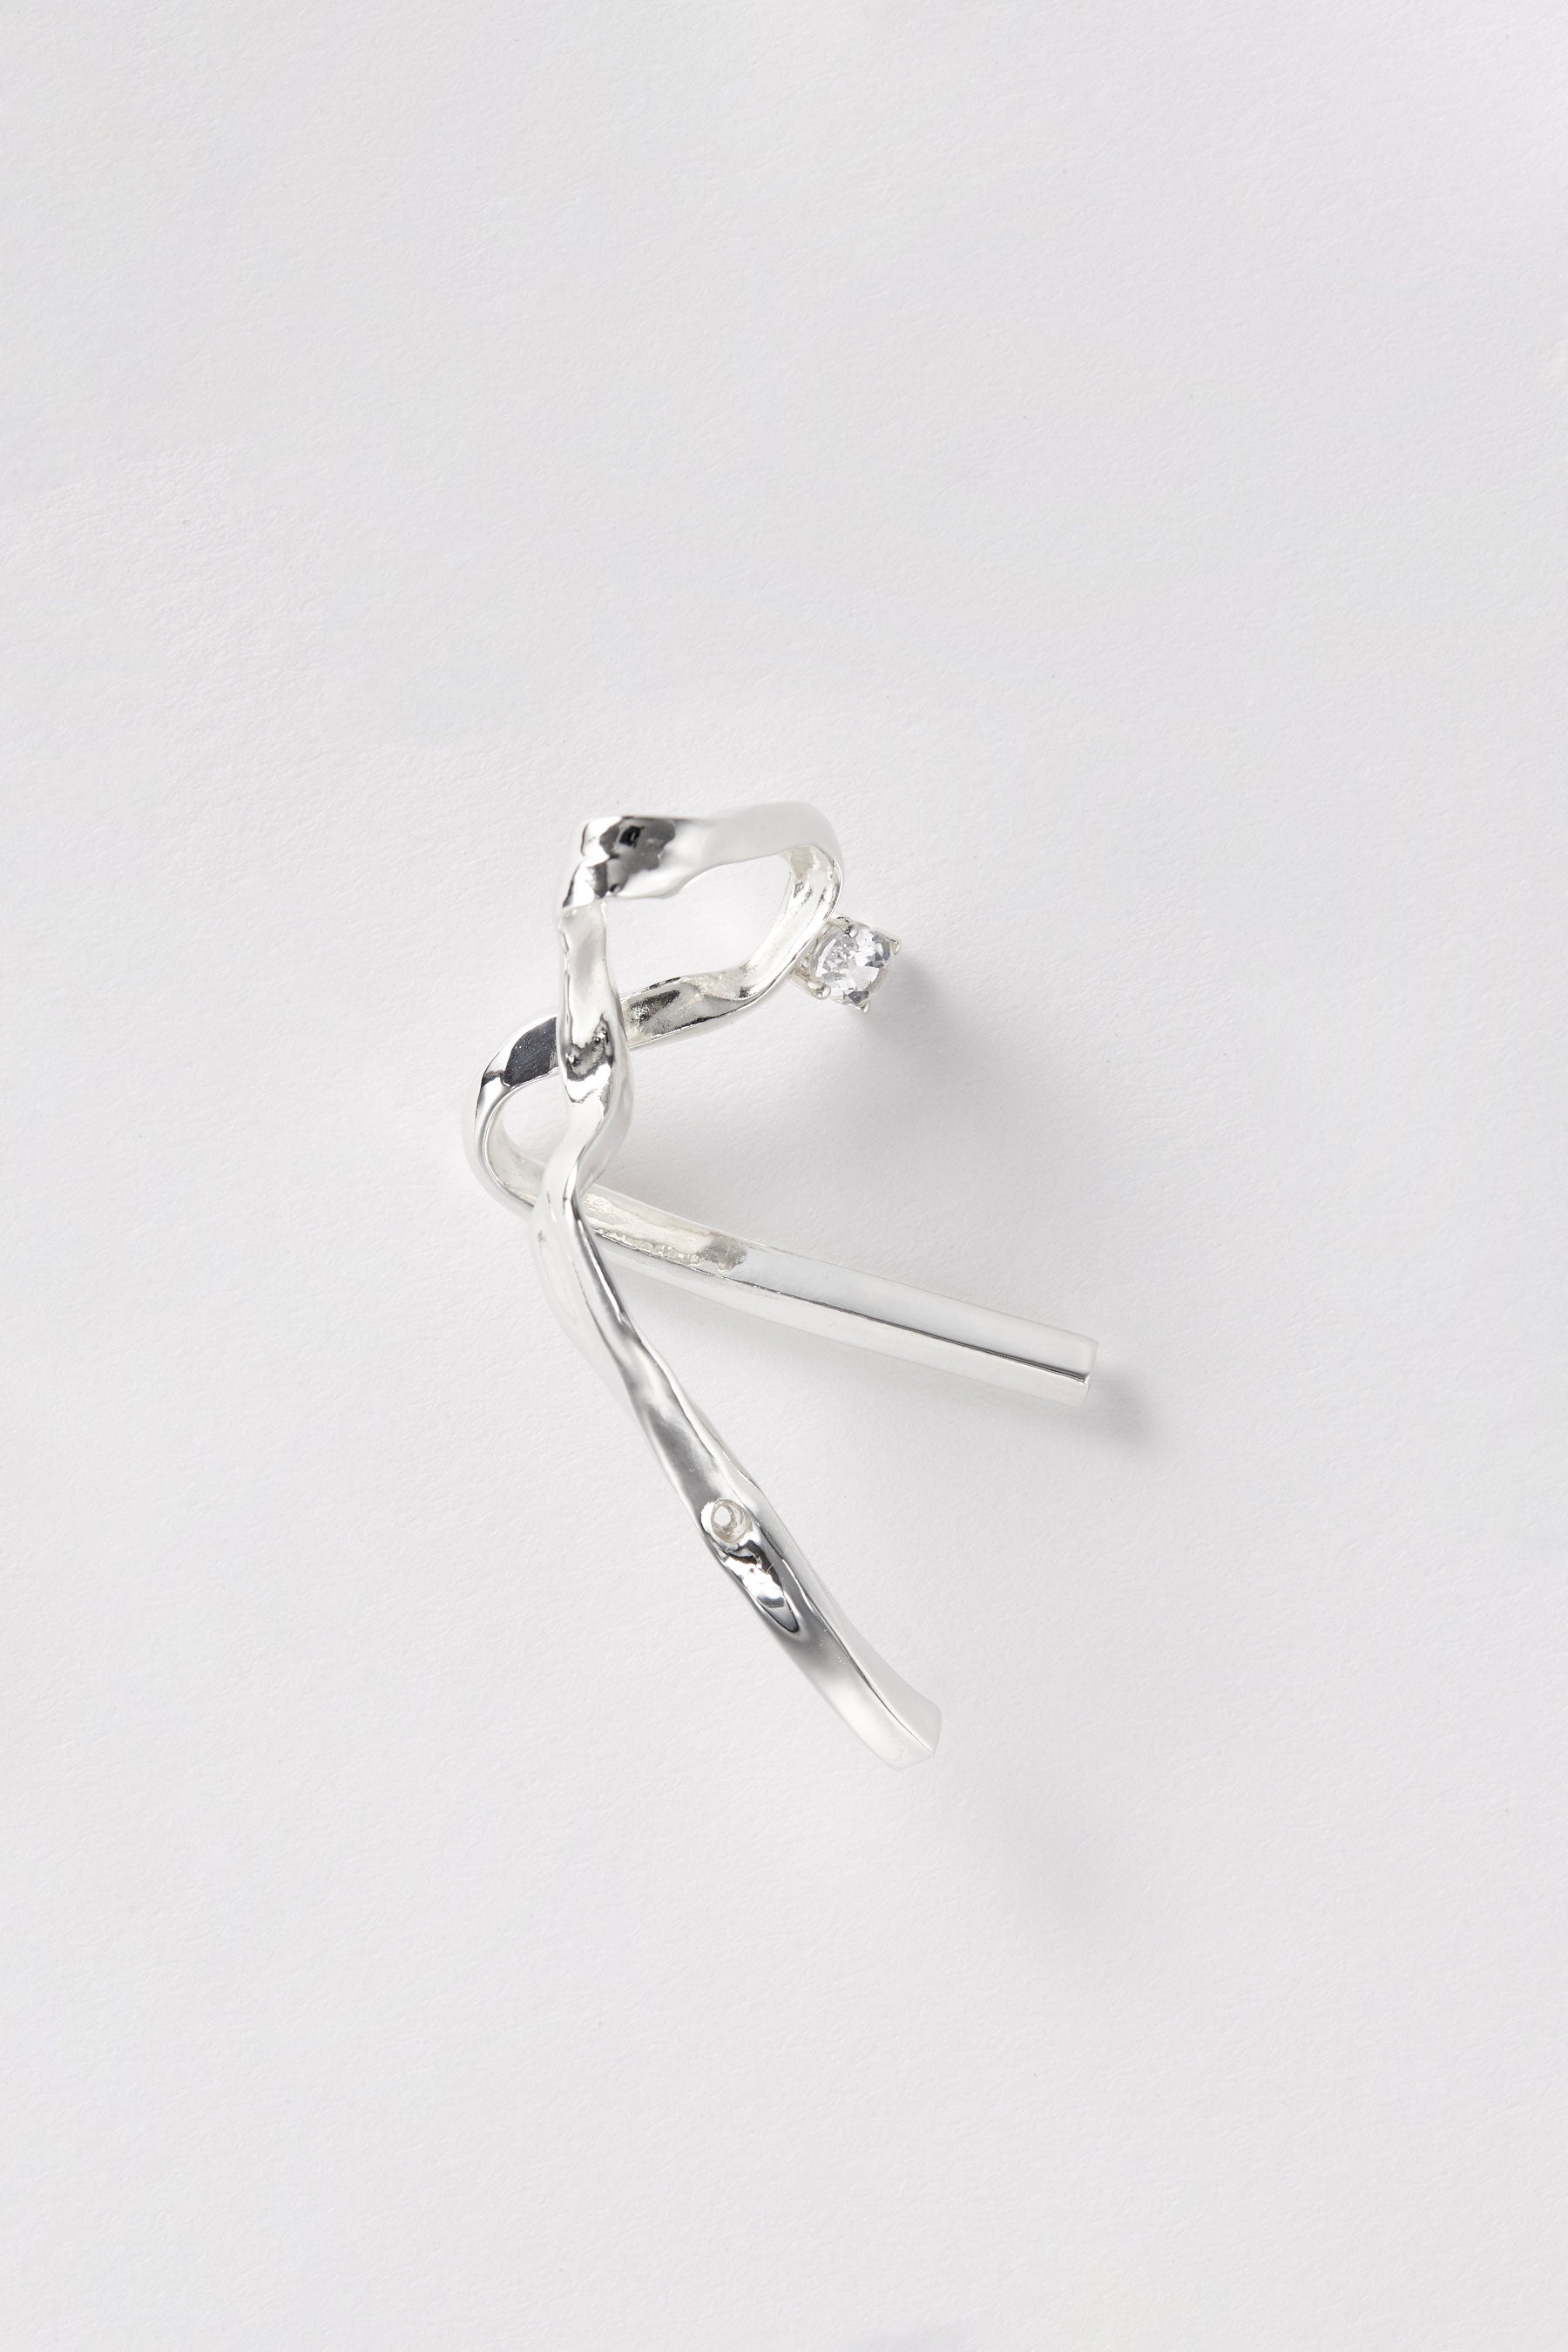 Silver Hinged Square Tube Ear Cuff with Colourless Topaz